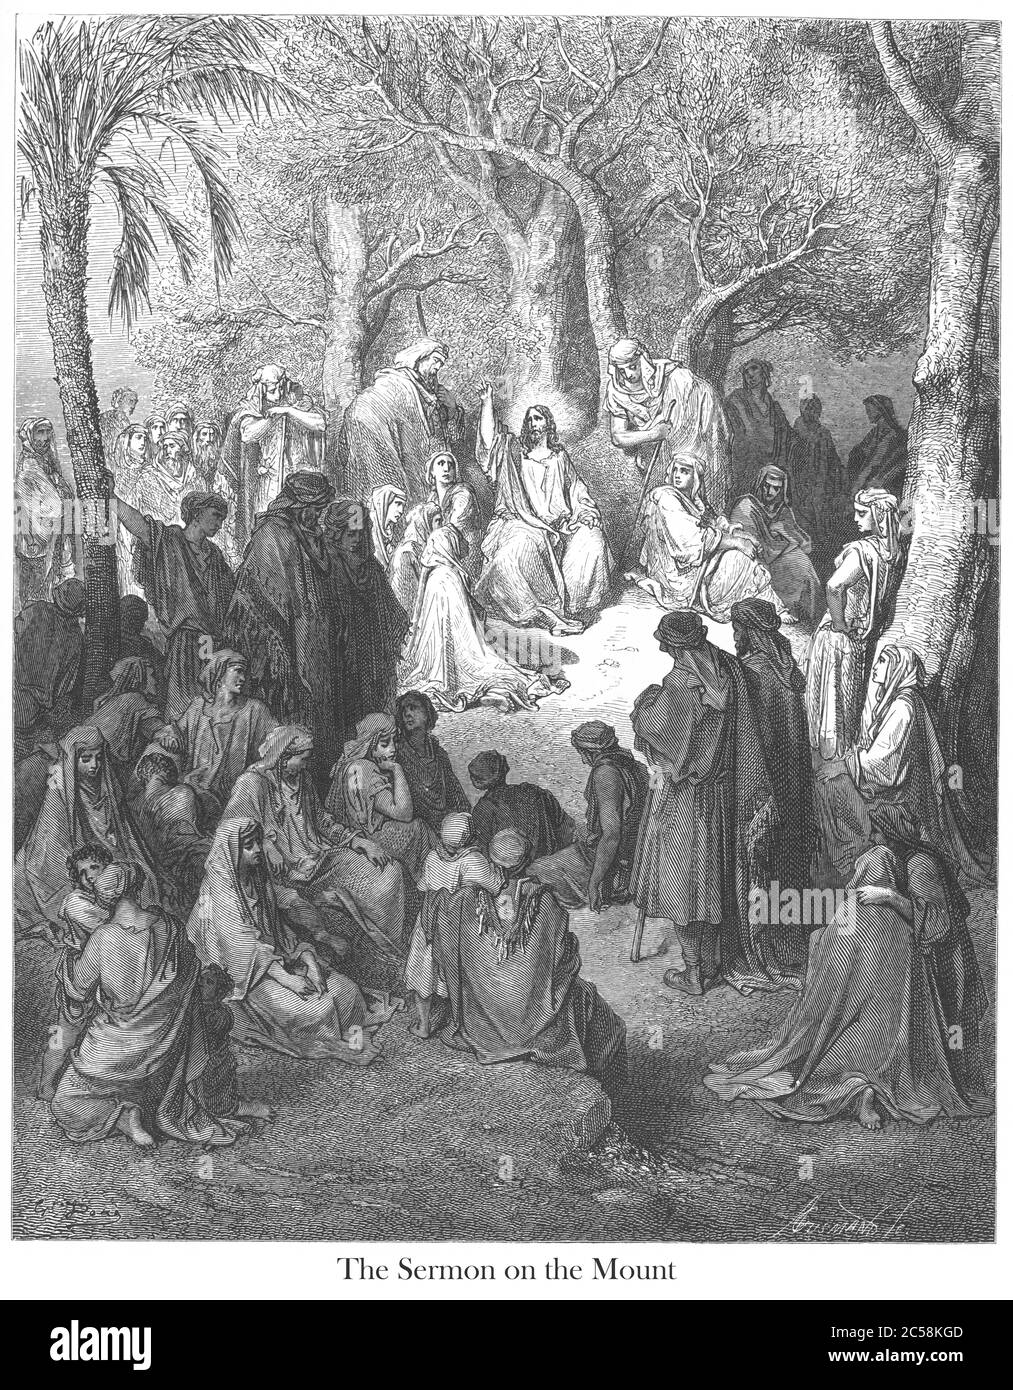 The Sermon on the Mount [Matthew 5:7-10] From the book 'Bible Gallery' Illustrated by Gustave Dore with Memoir of Dore and Descriptive Letter-press by Talbot W. Chambers D.D. Published by Cassell & Company Limited in London and simultaneously by Mame in Tours, France in 1866 Stock Photo